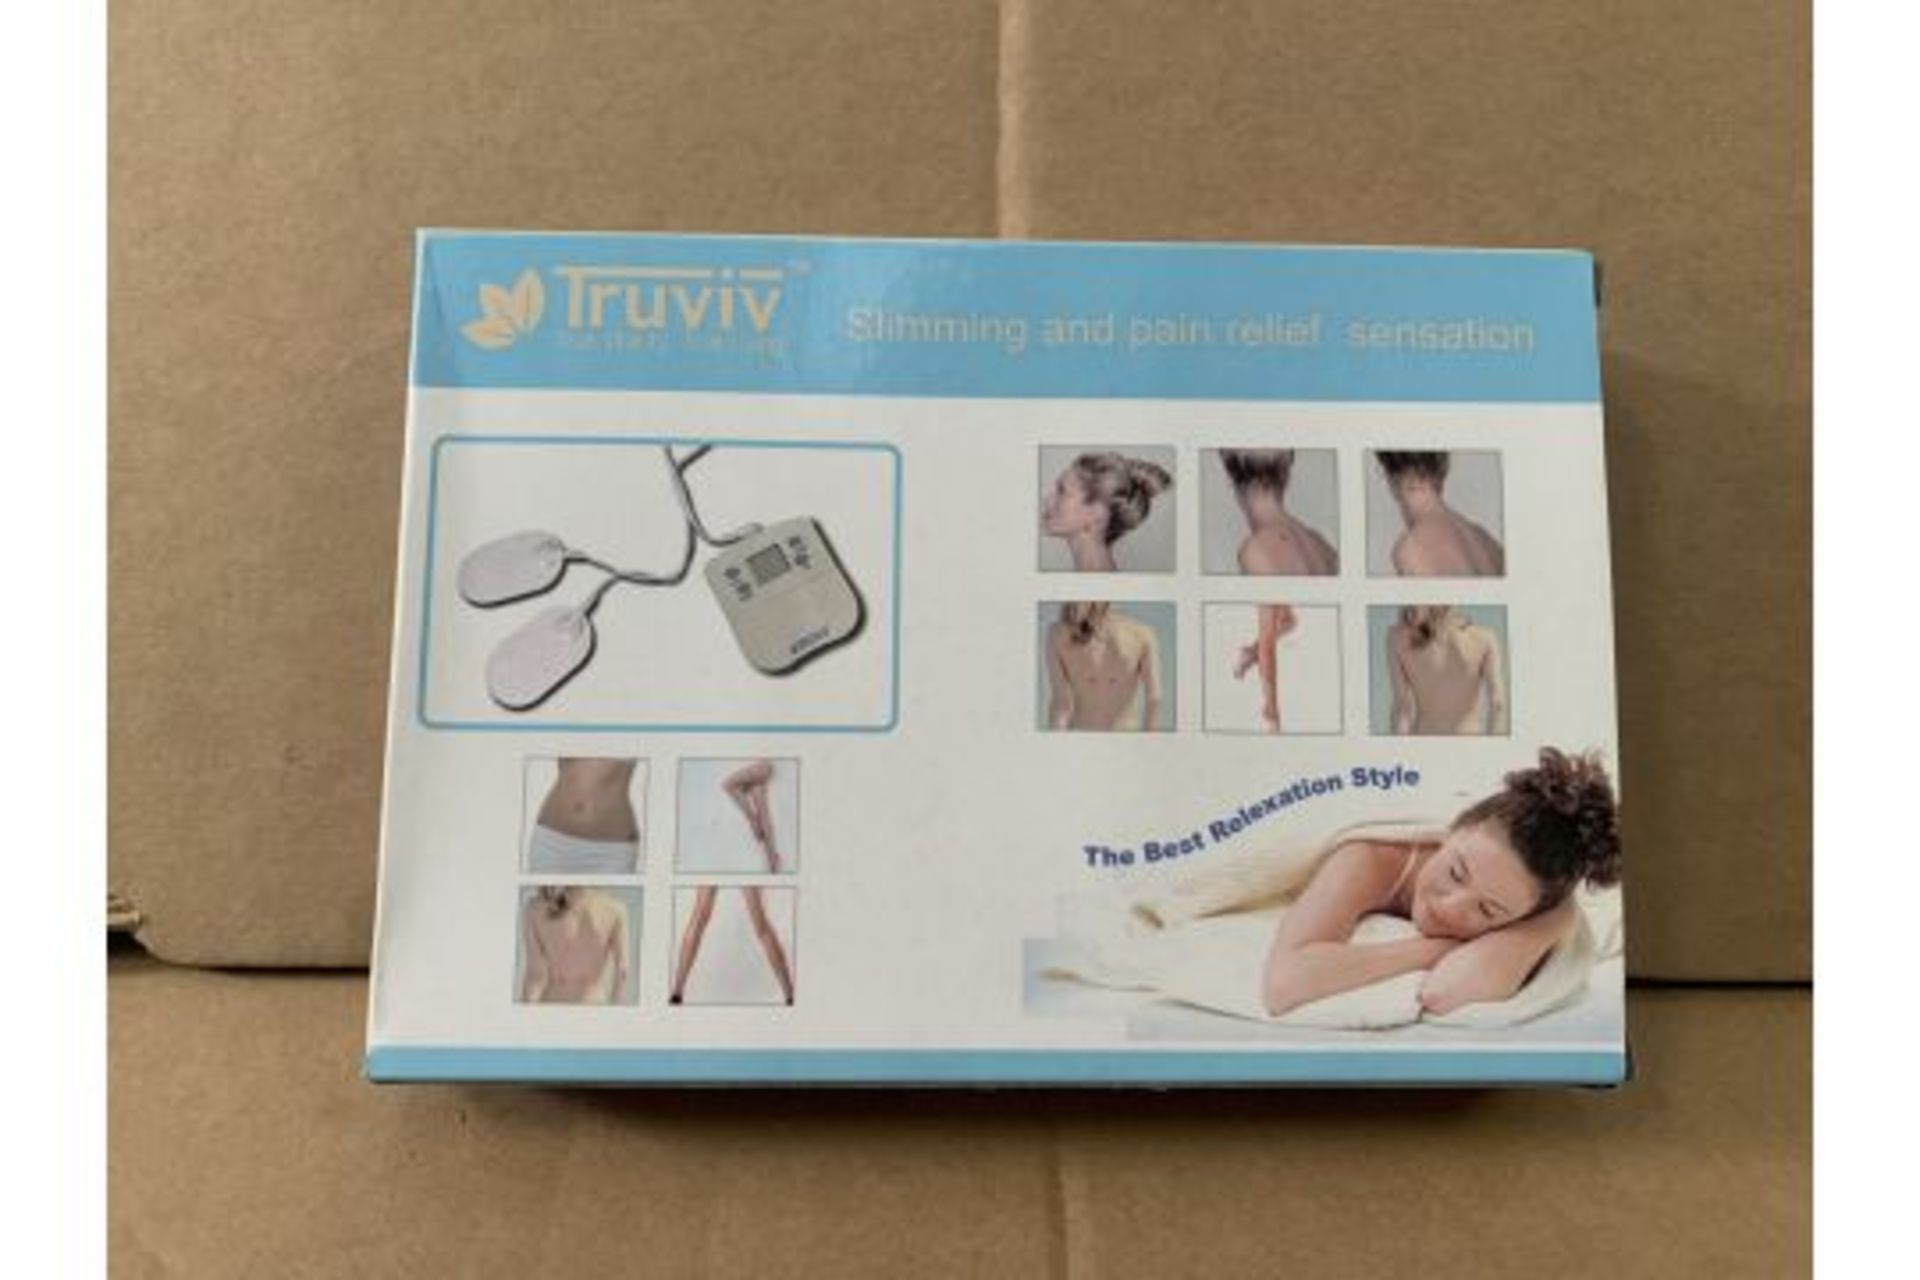 5 X BRAND NEW TRUVIV TRU FIT SLIMMING AND PAIN RELIEF MASSAGERS RRP £99 EACH S1